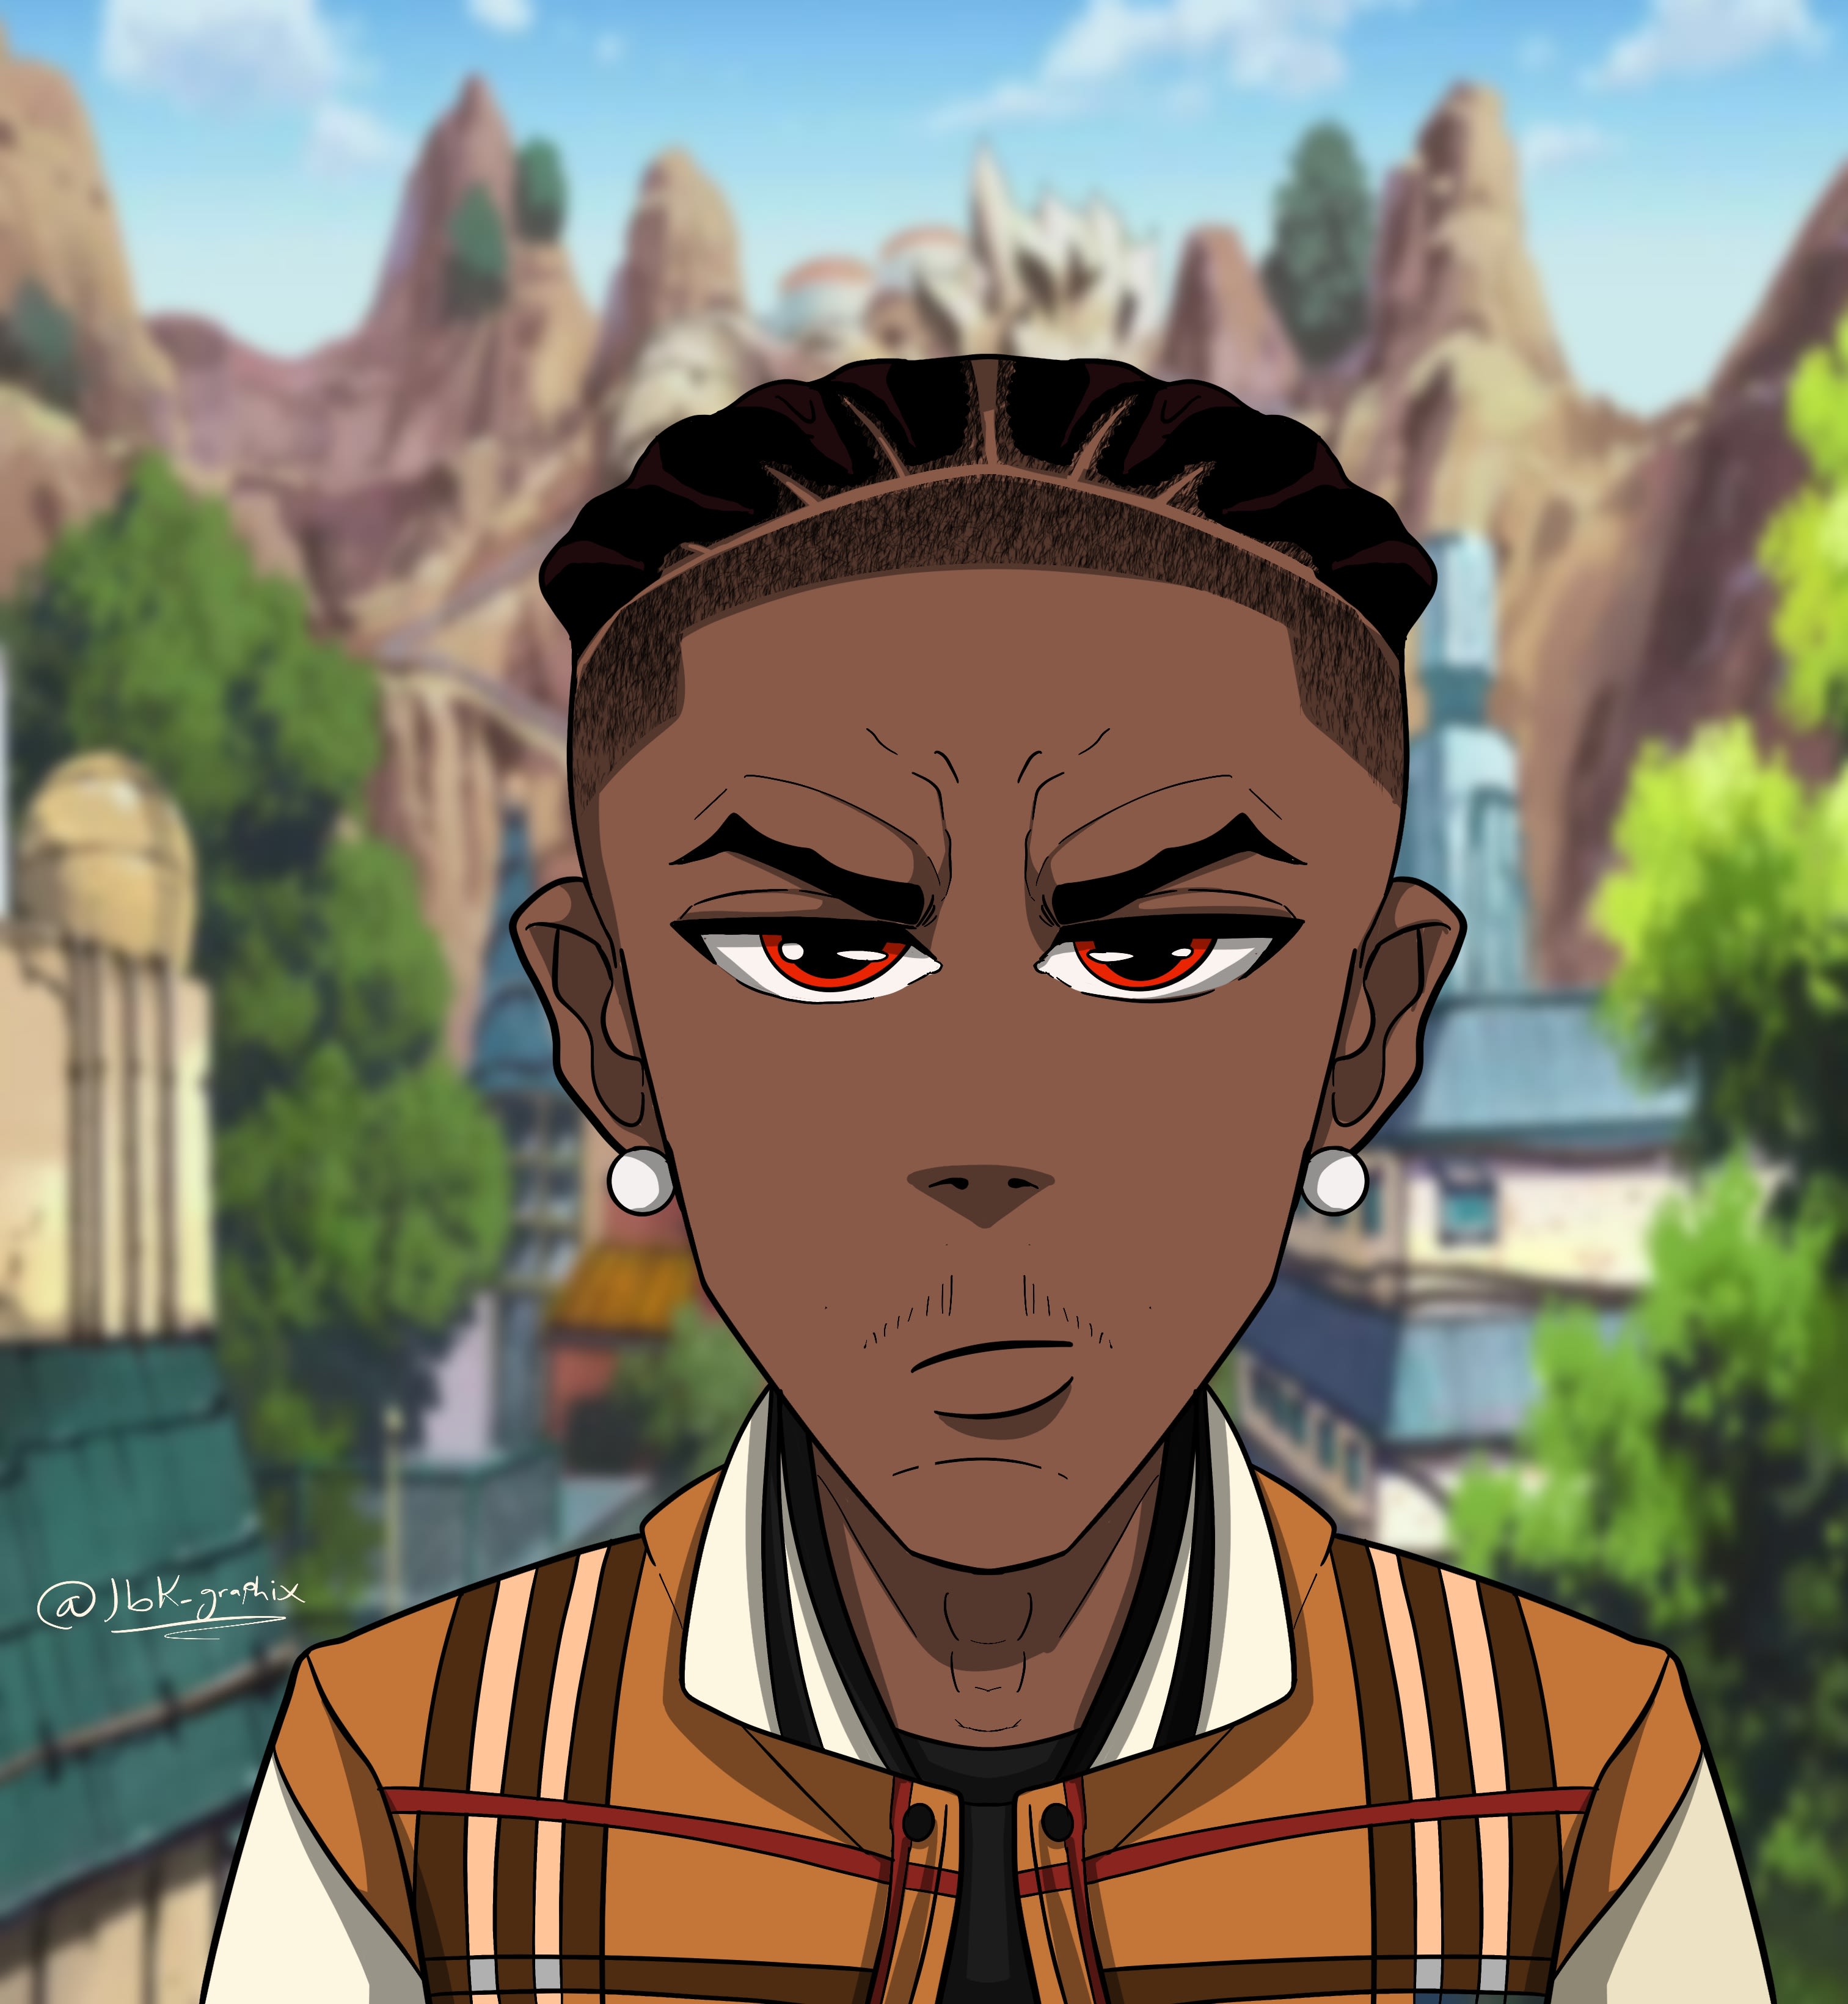 The Boondocks Getting Rebooted, Aaron McGruder Confirms Involvement